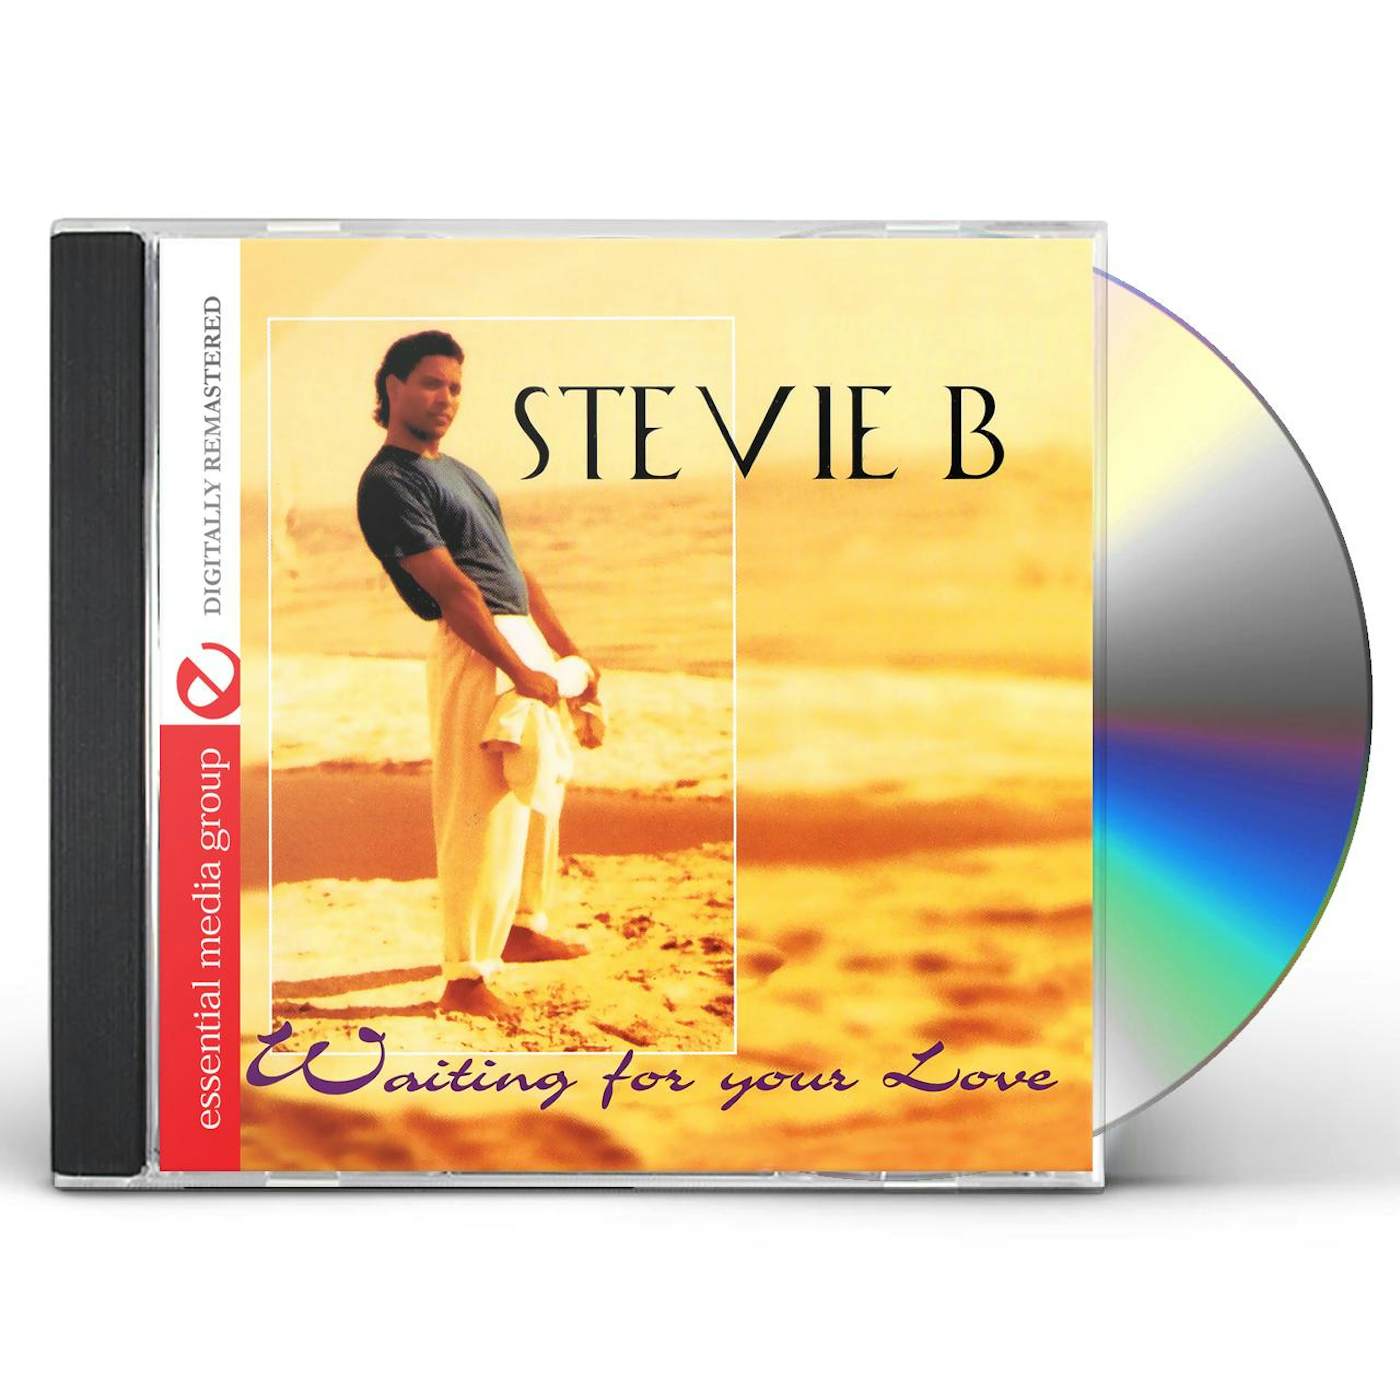 Stevie B WAITING FOR YOUR LOVE CD